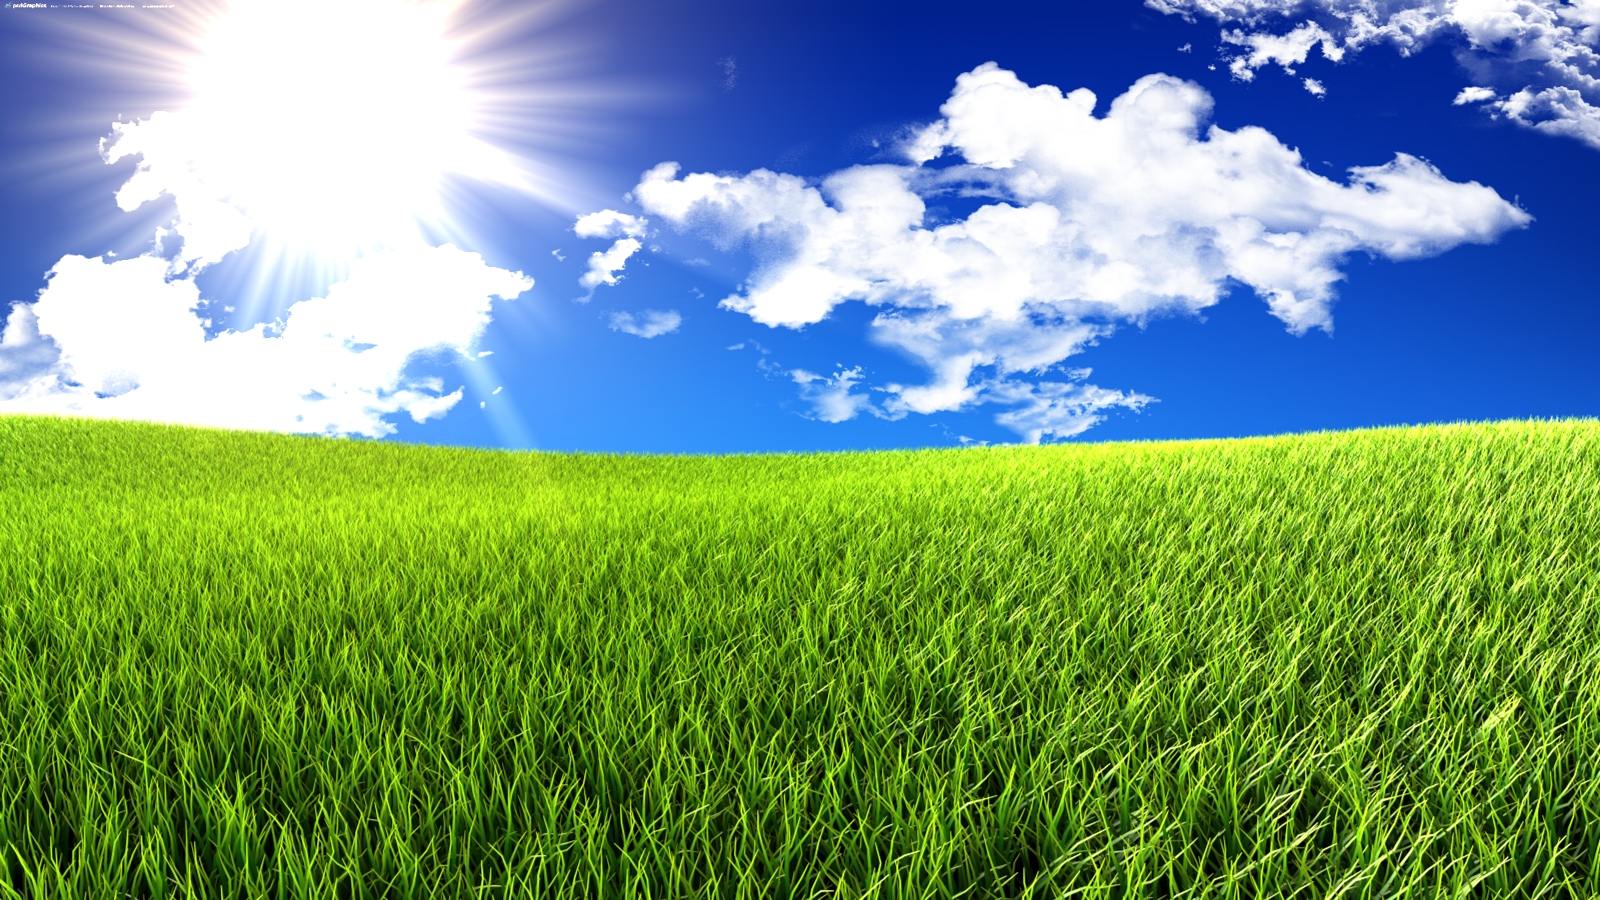 Keywords Grass And Sky Wallpaper and Tags